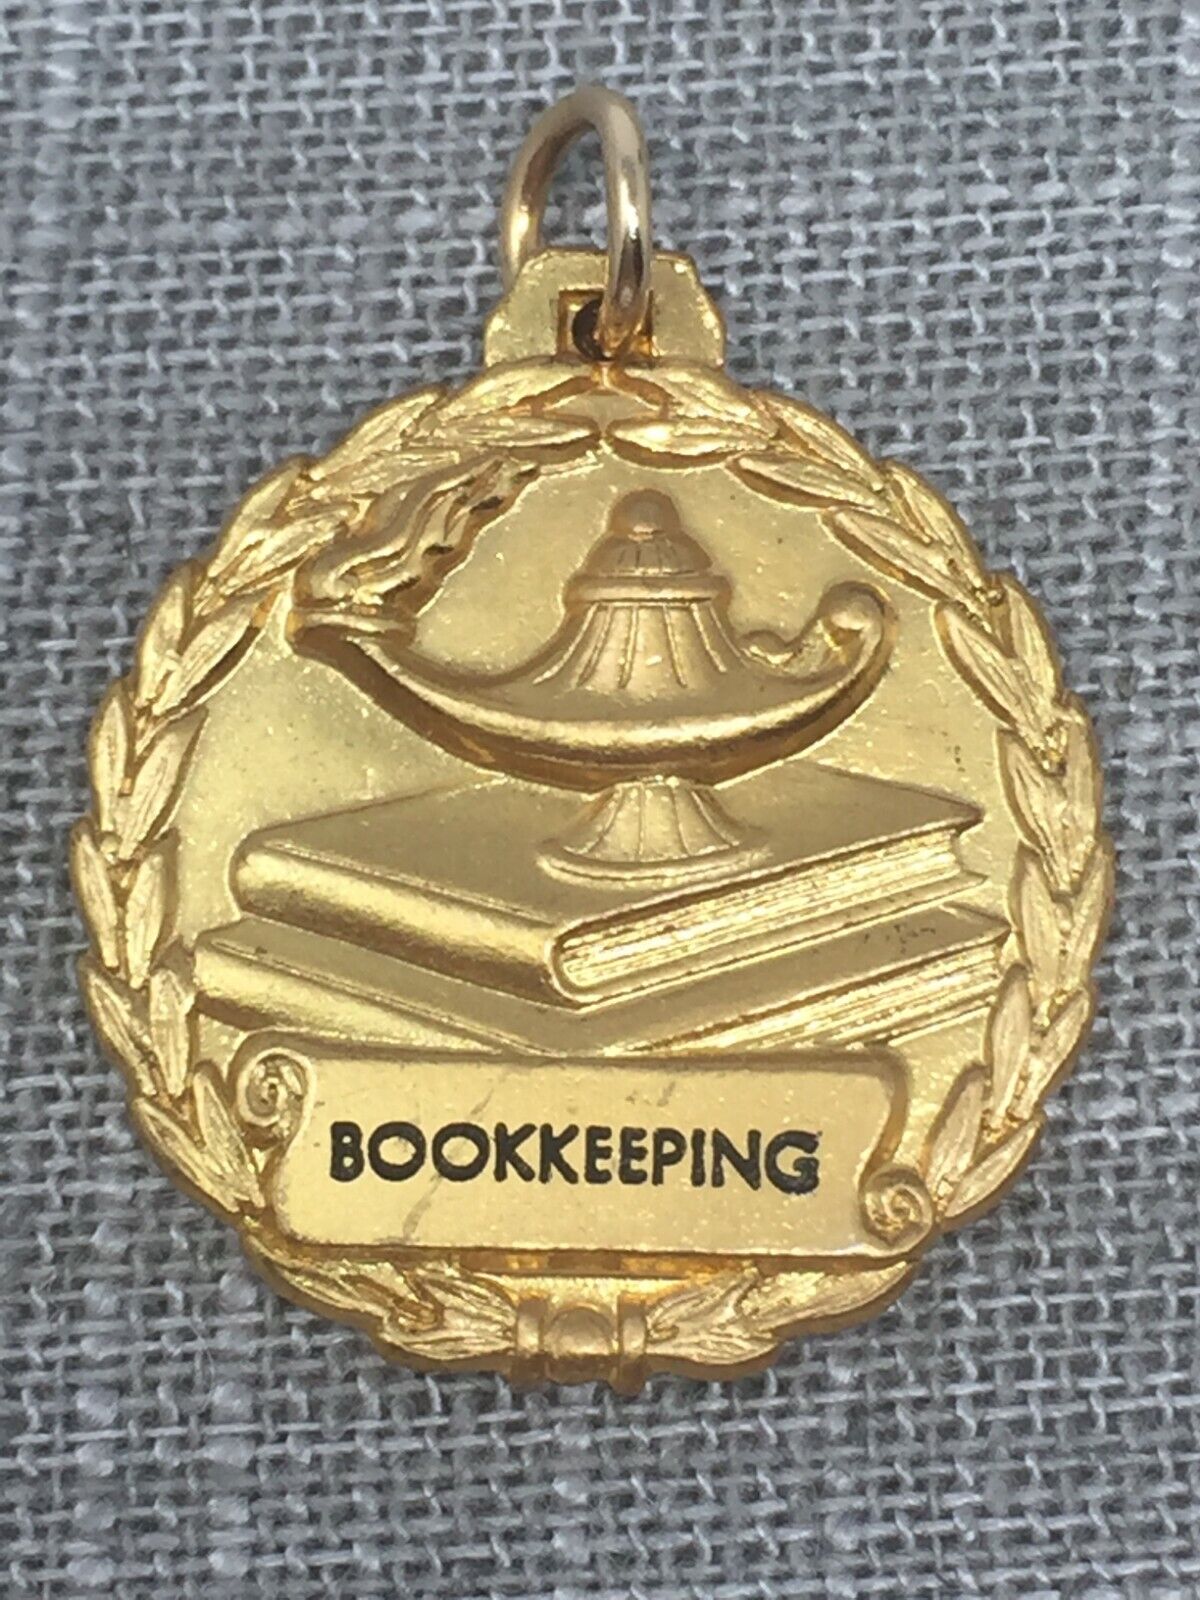 Balfour Bookkeeping Medal Award 10K Gold Plated Stamped 1974 S. U. Rally 1st